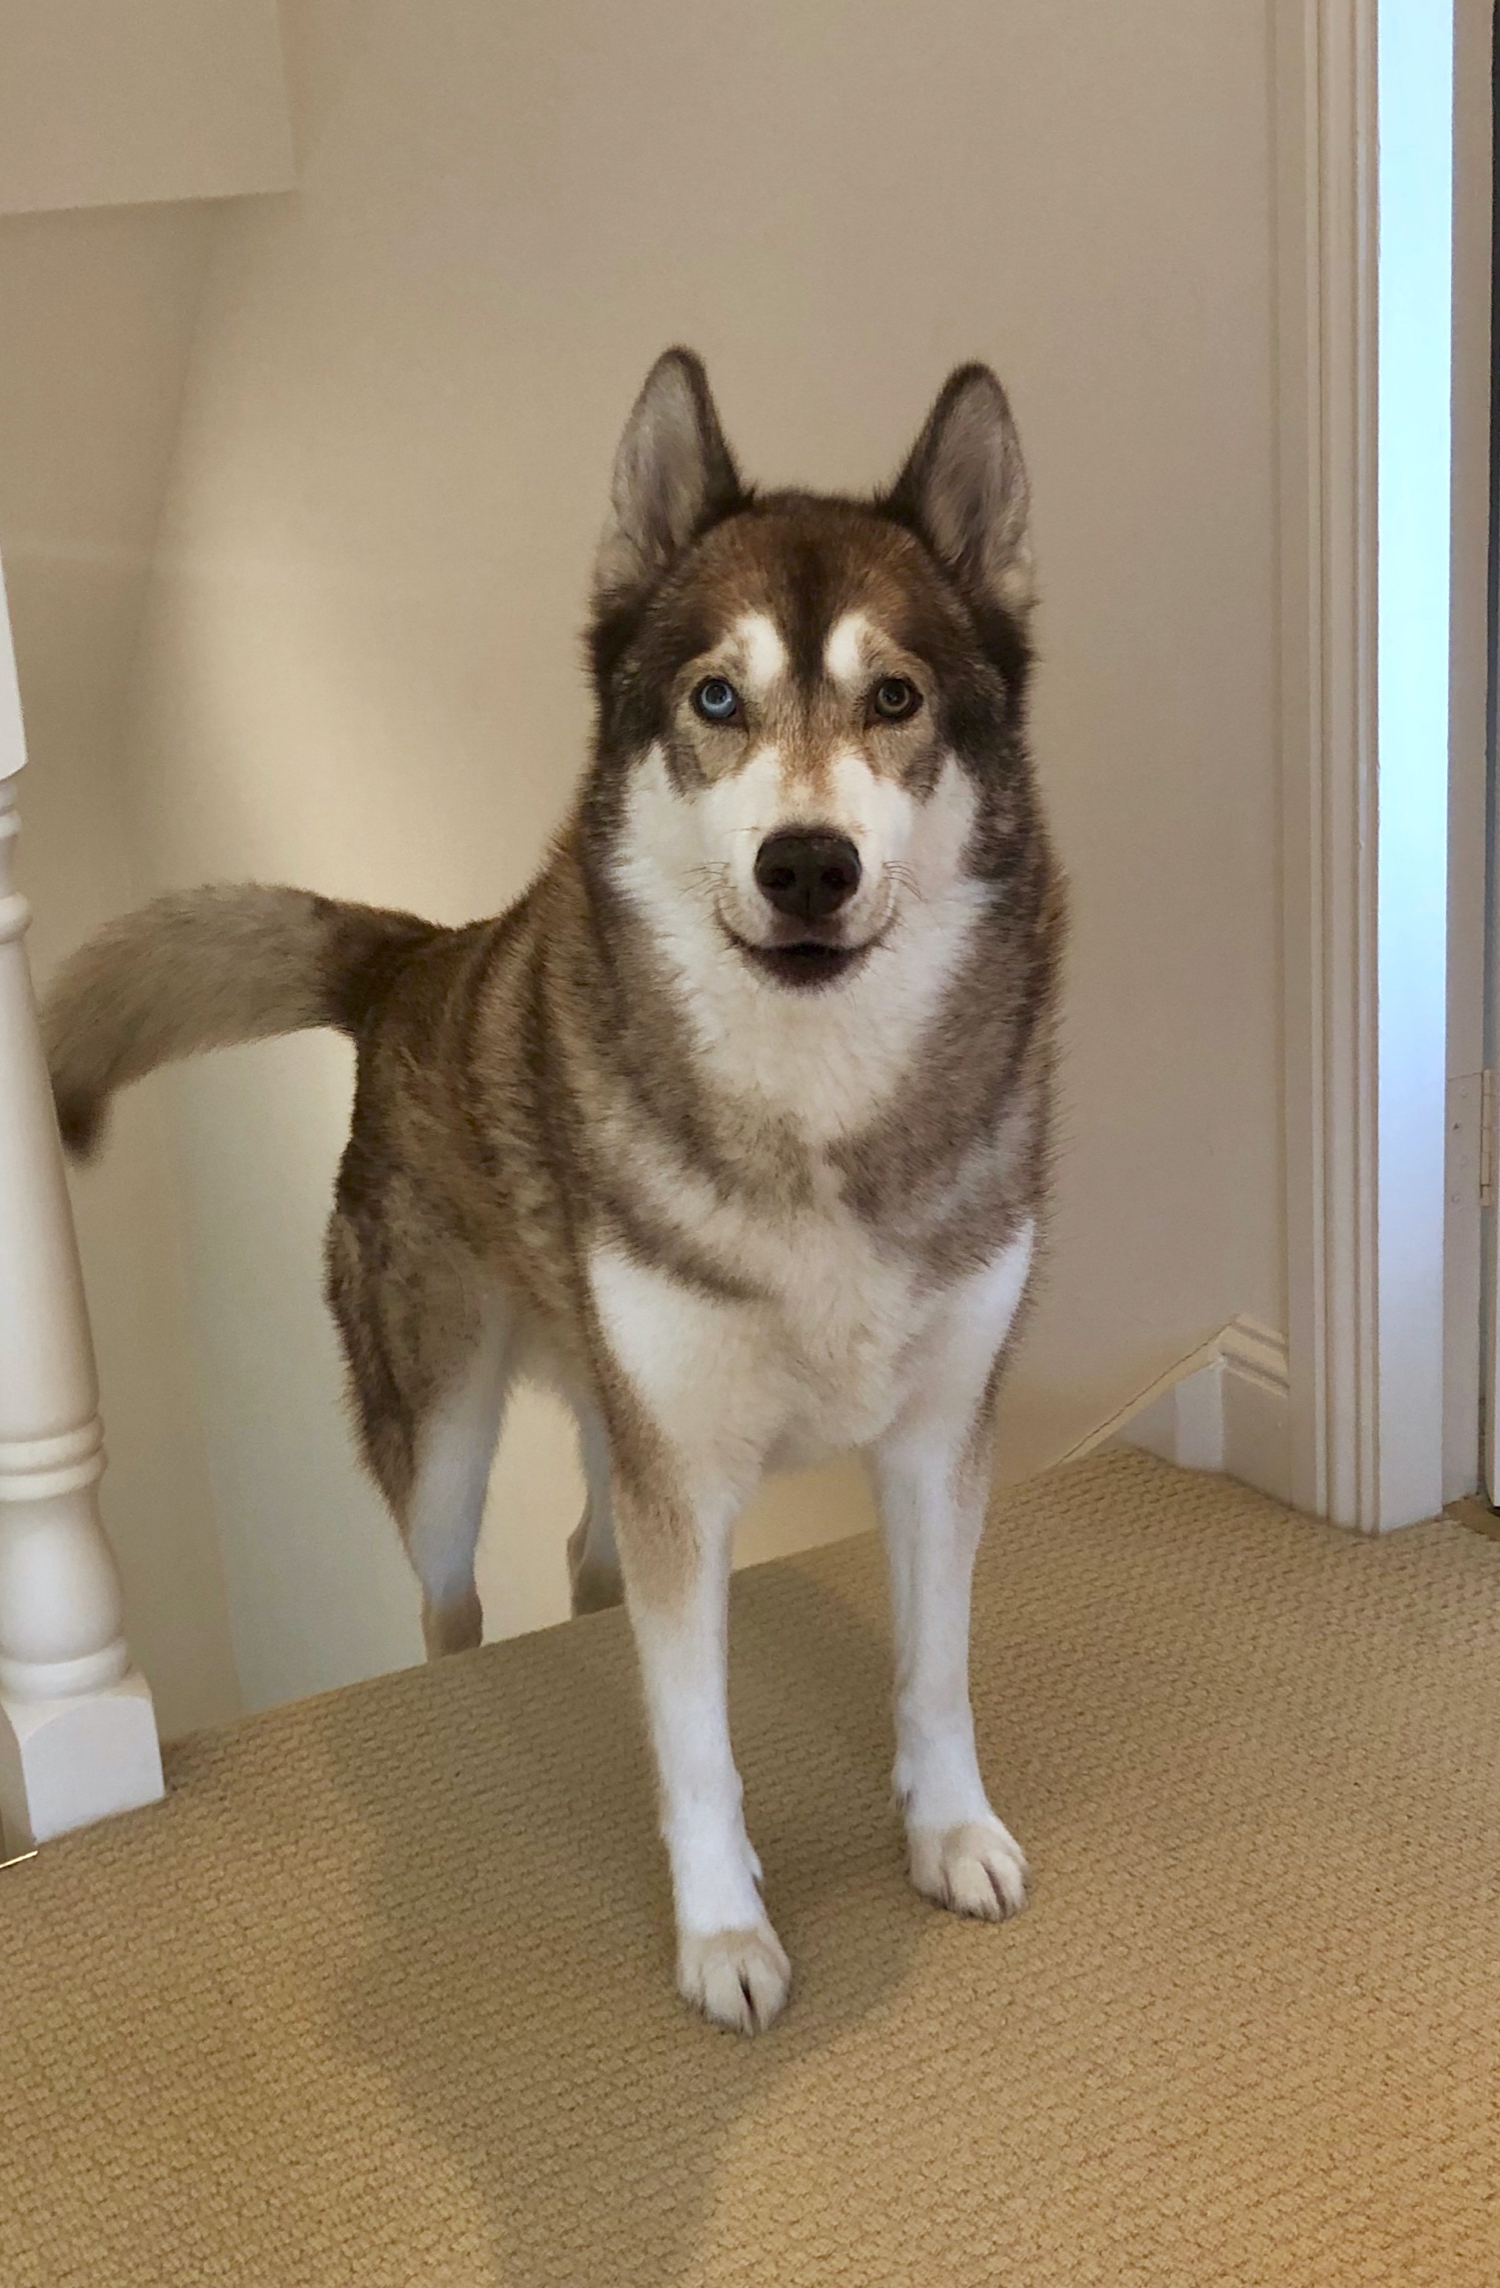 Oskar the huskamute coming up the stairs with an expectant look on his face.